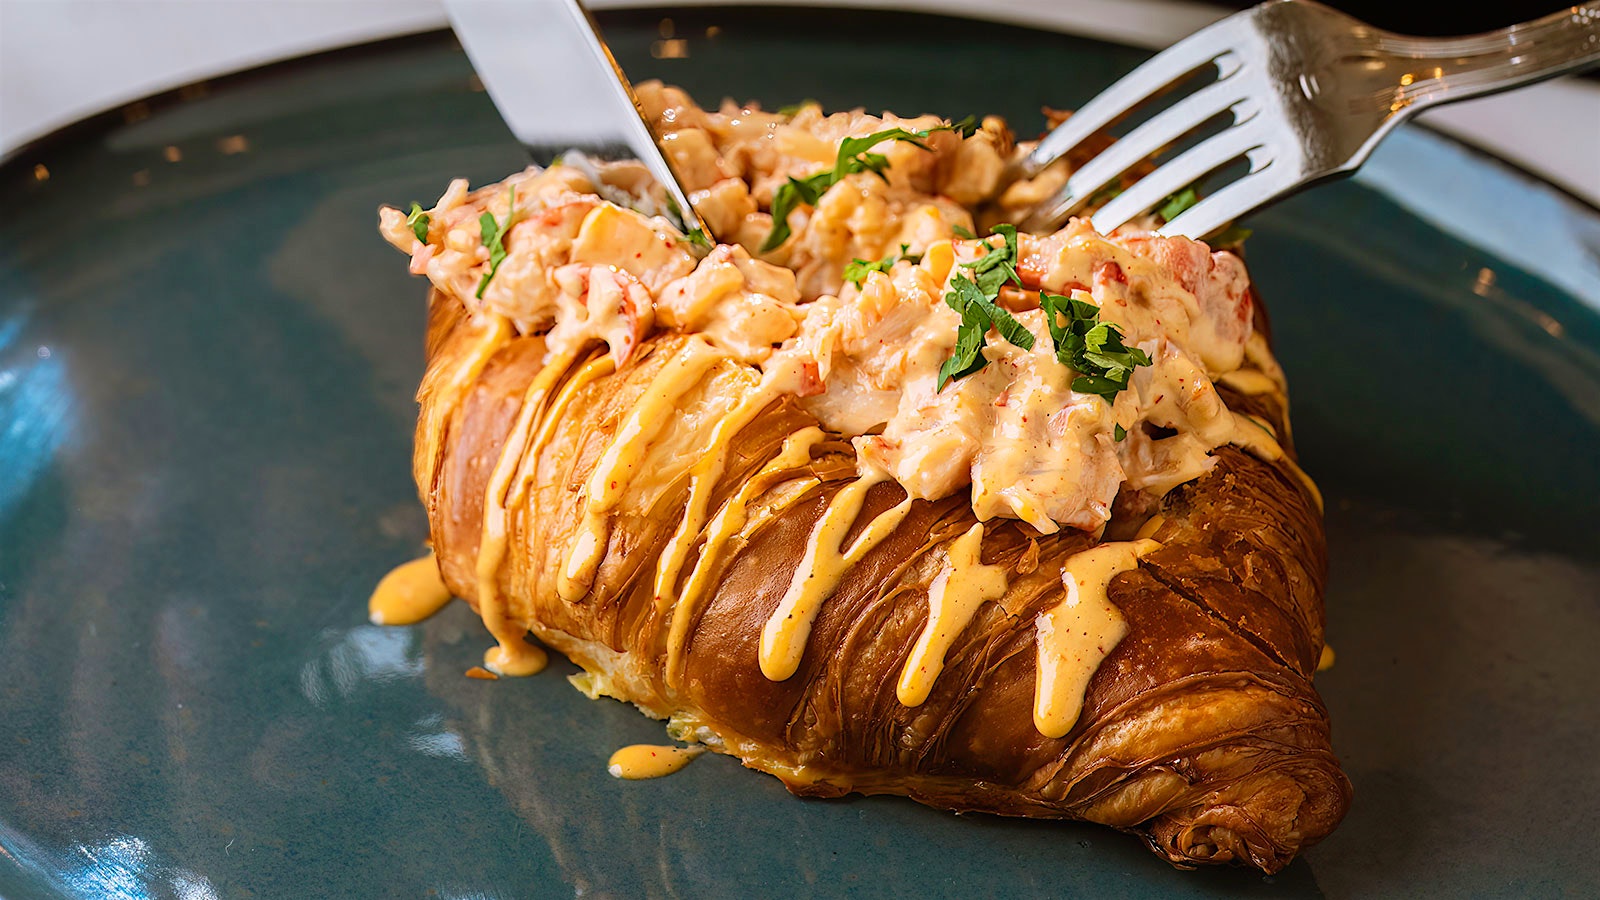  A diner cutting with a knife and fork into a croissant filled with a Maine lobster salad